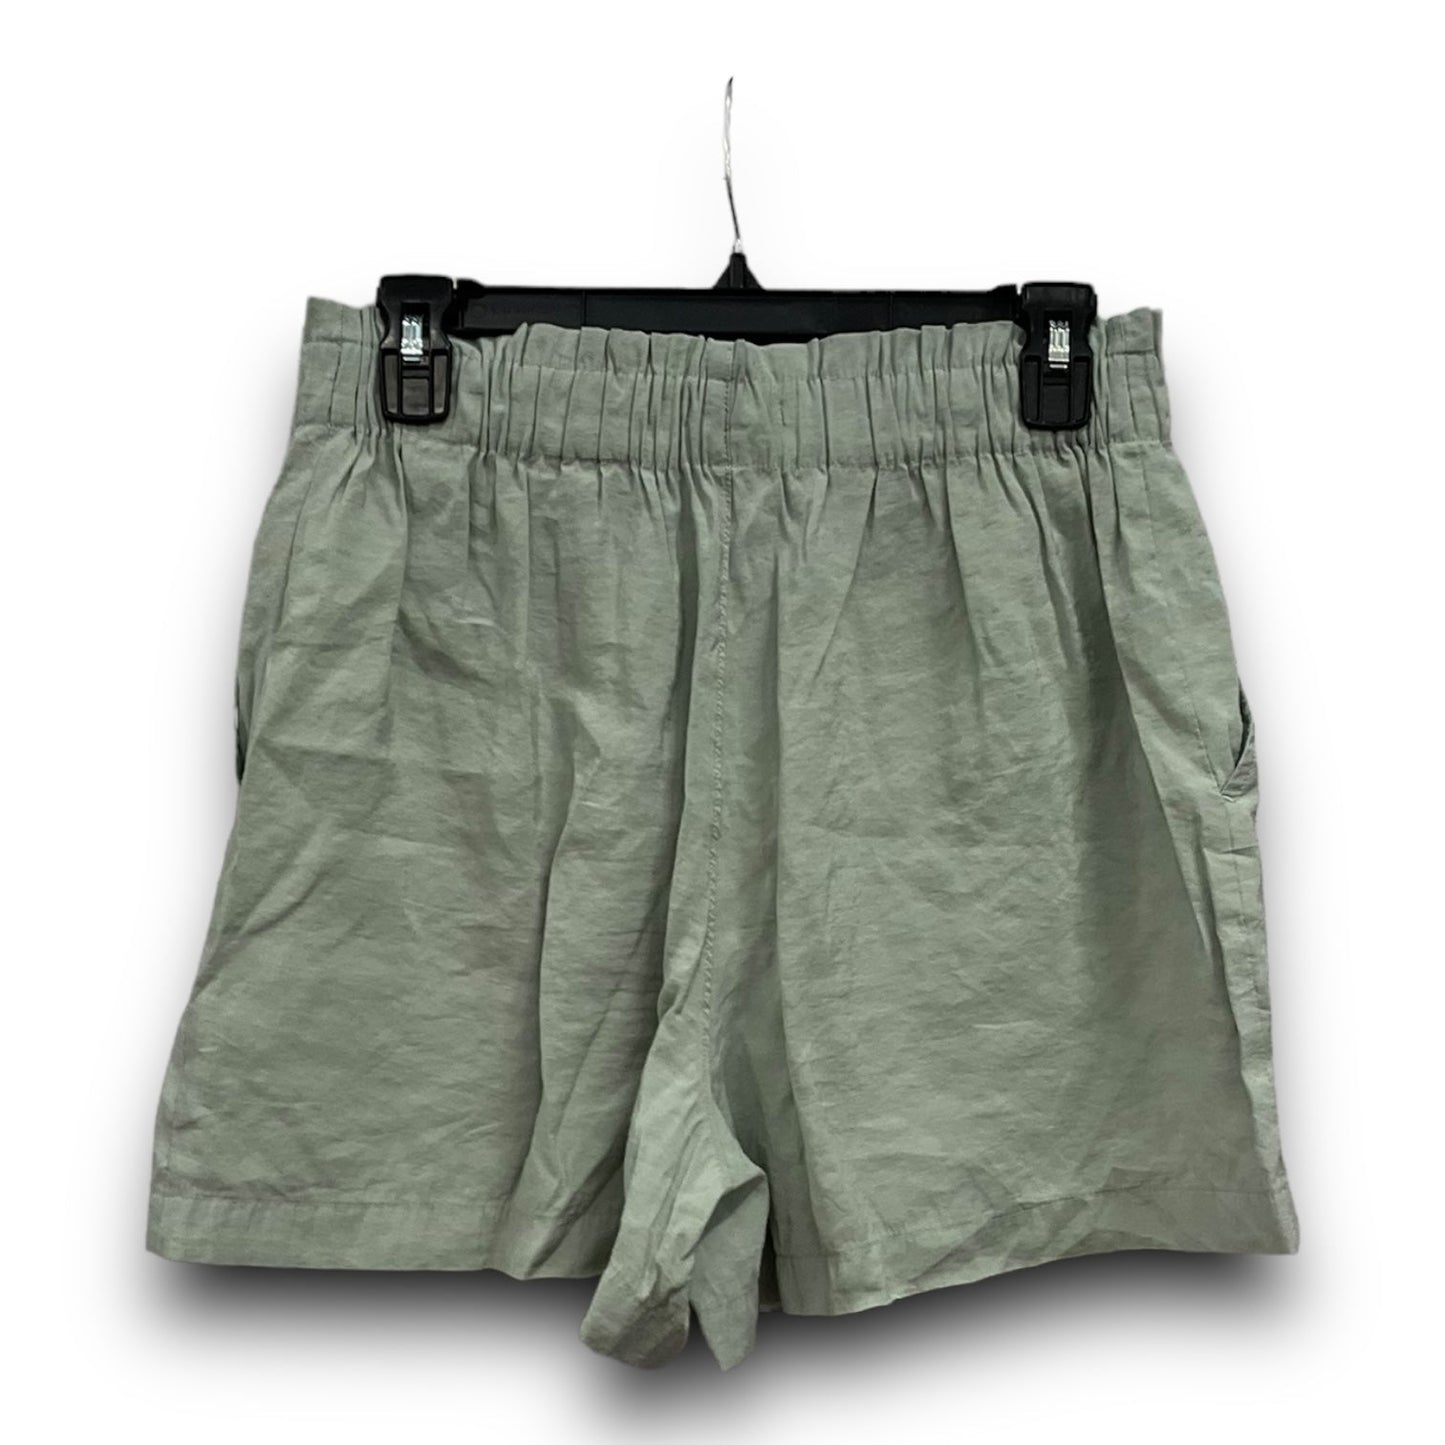 Green Shorts Madewell, Size S